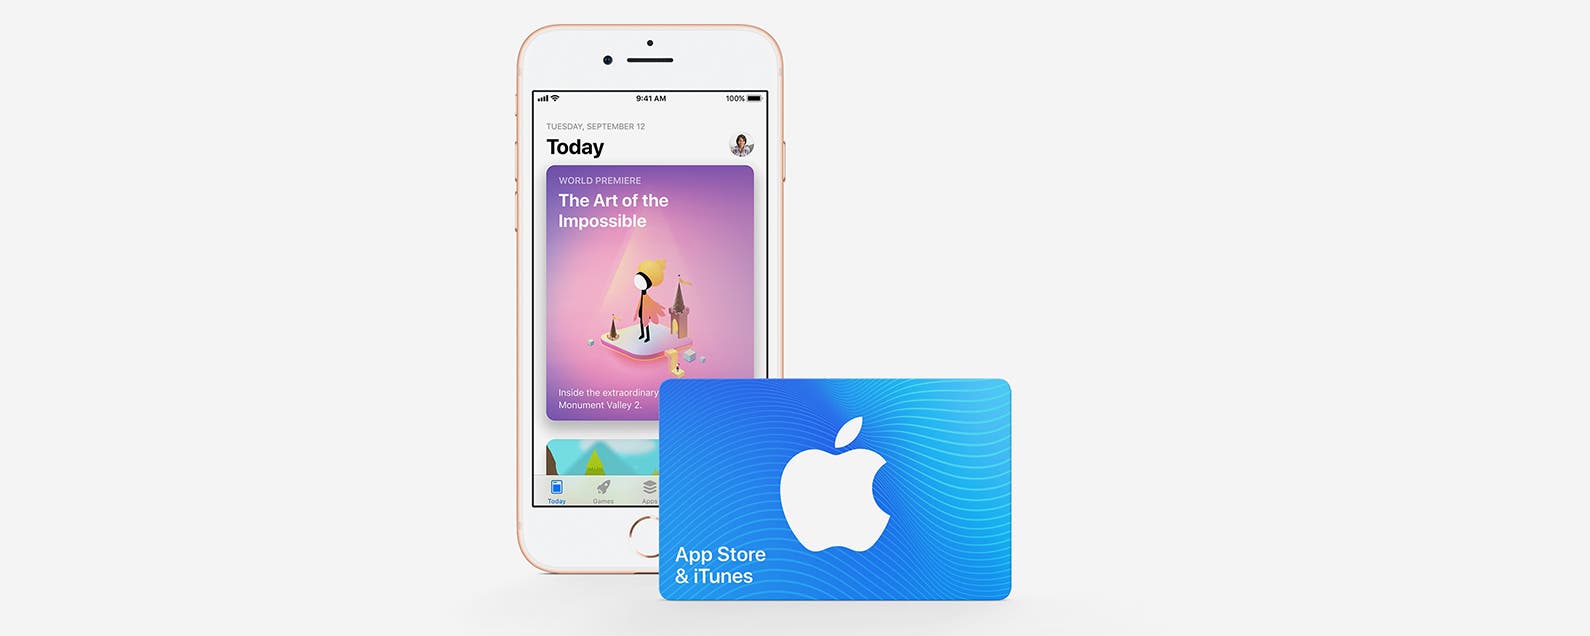 How To Use An Itunes Gift Card With Family Sharing 2019 - how to buy robux using itunes gift card 2020